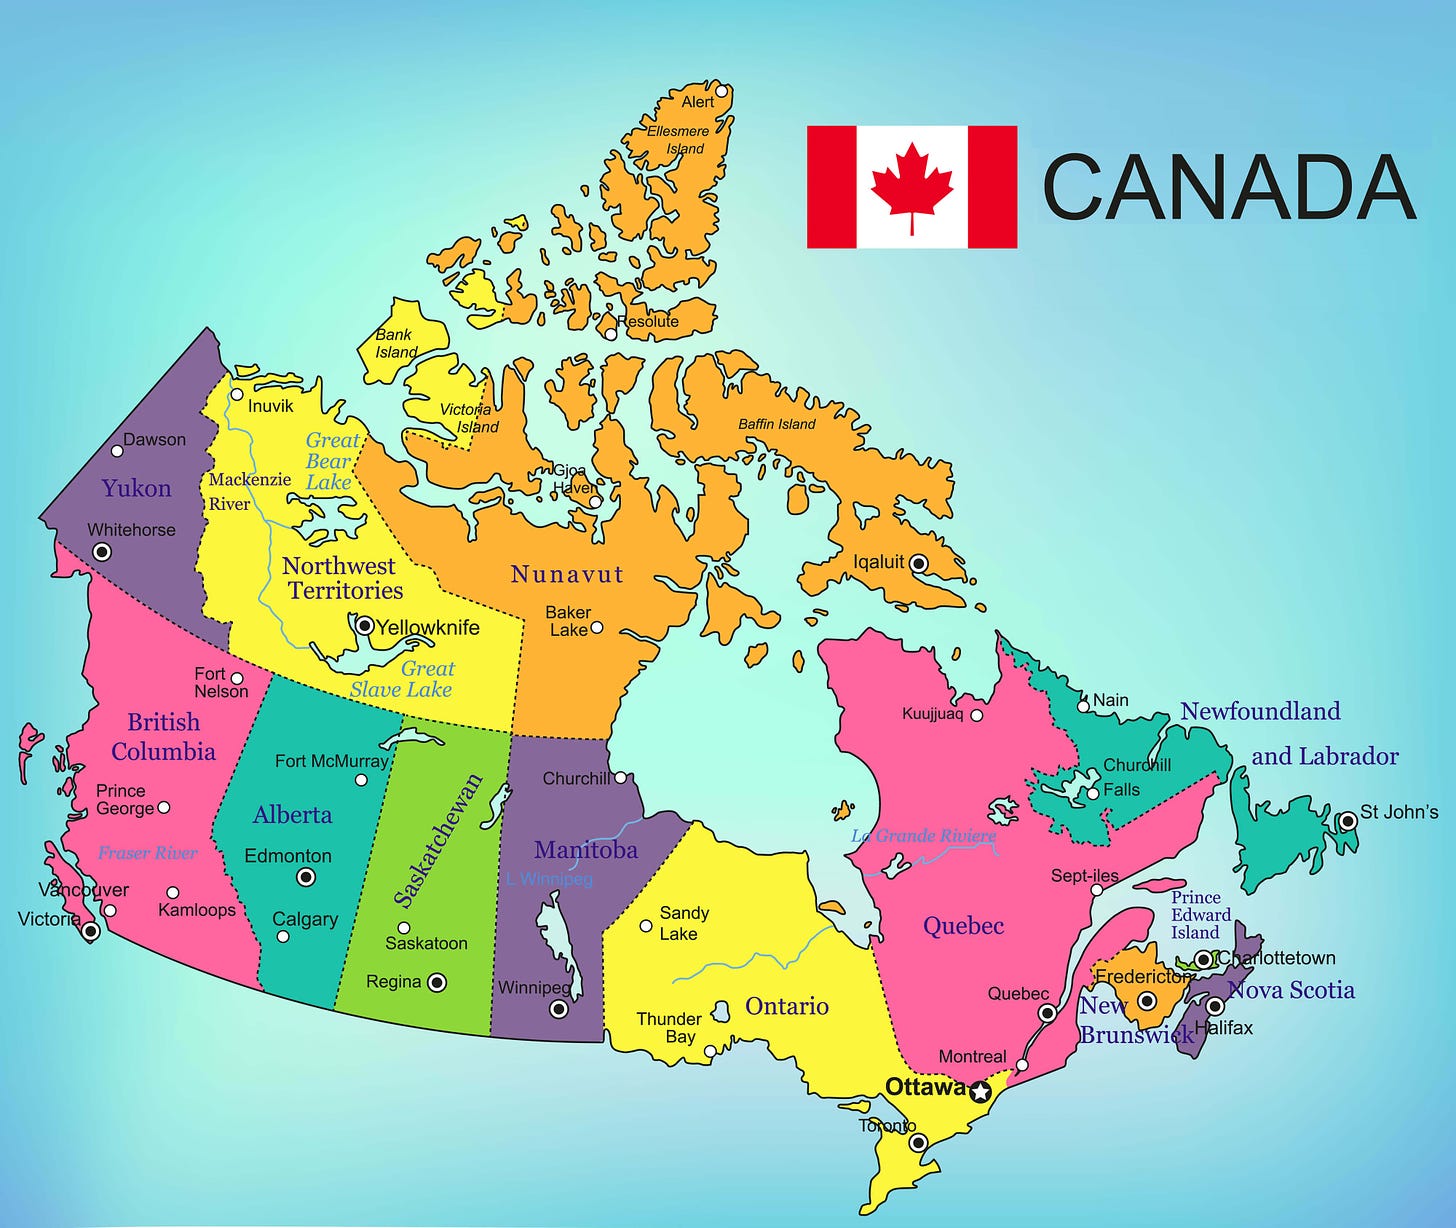 Map of Canada with provincial and territorial boundaries